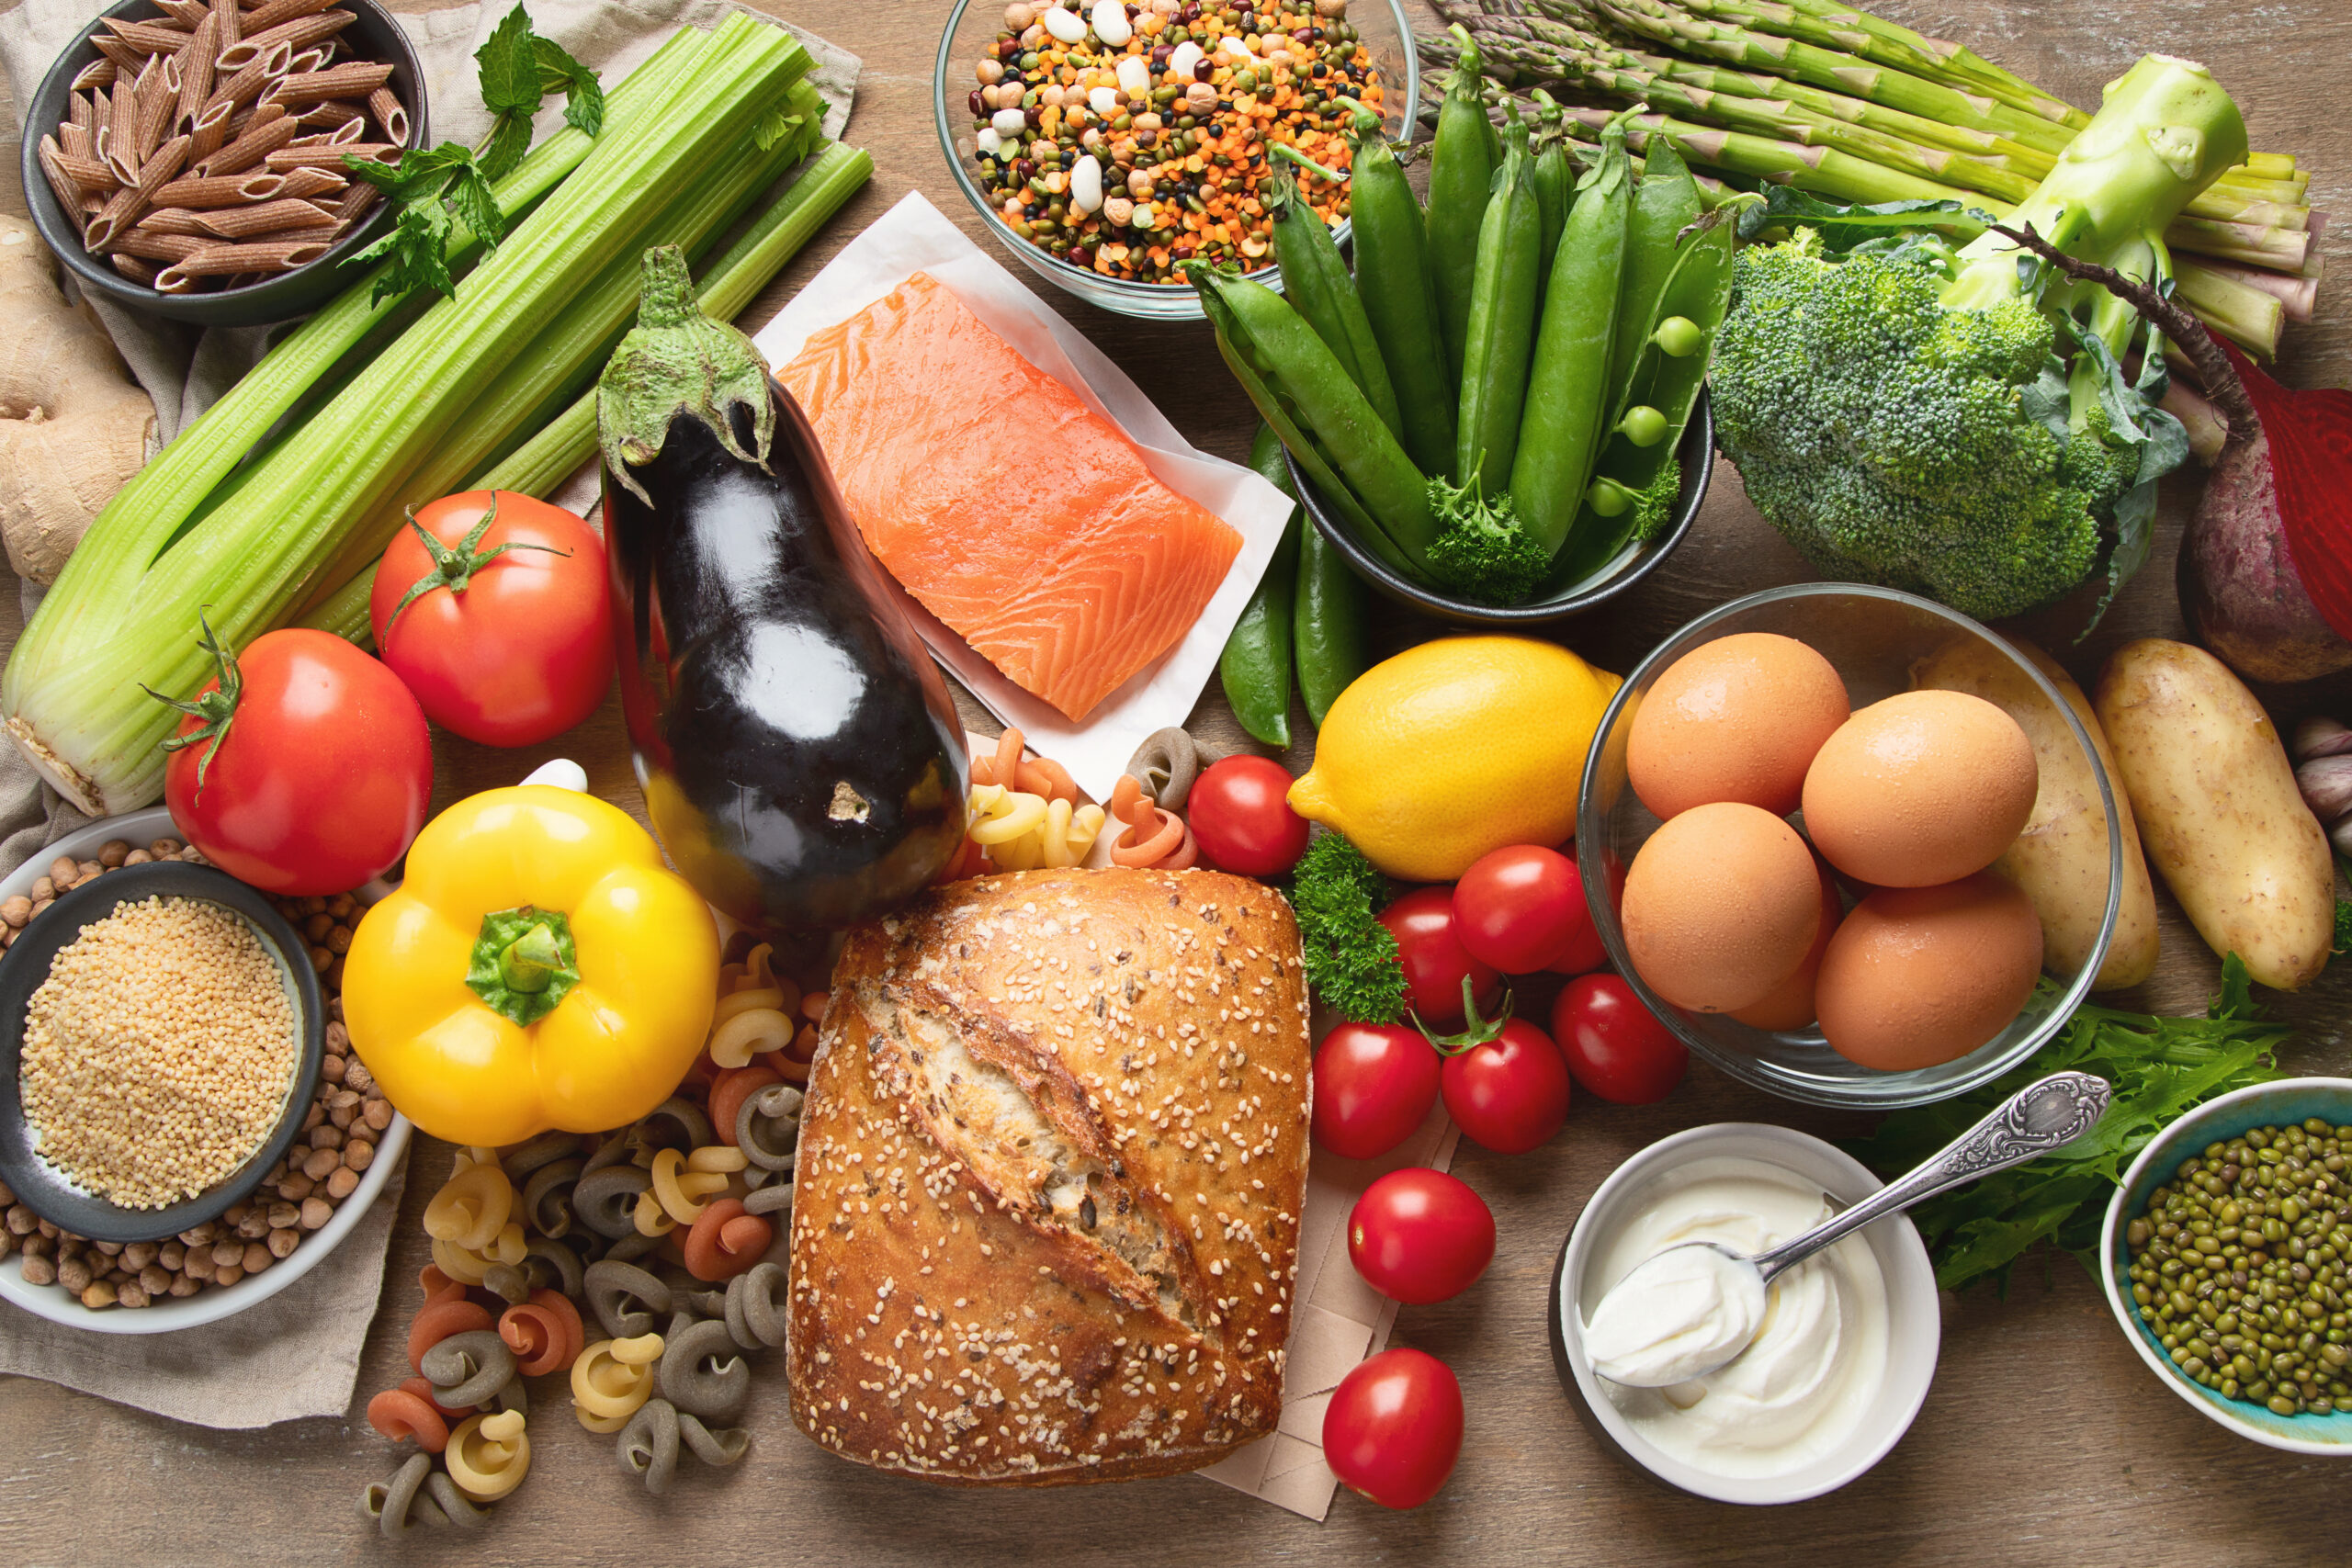 The Mediterranean diet is rich in vegetables, fish, whole grains and olive oil